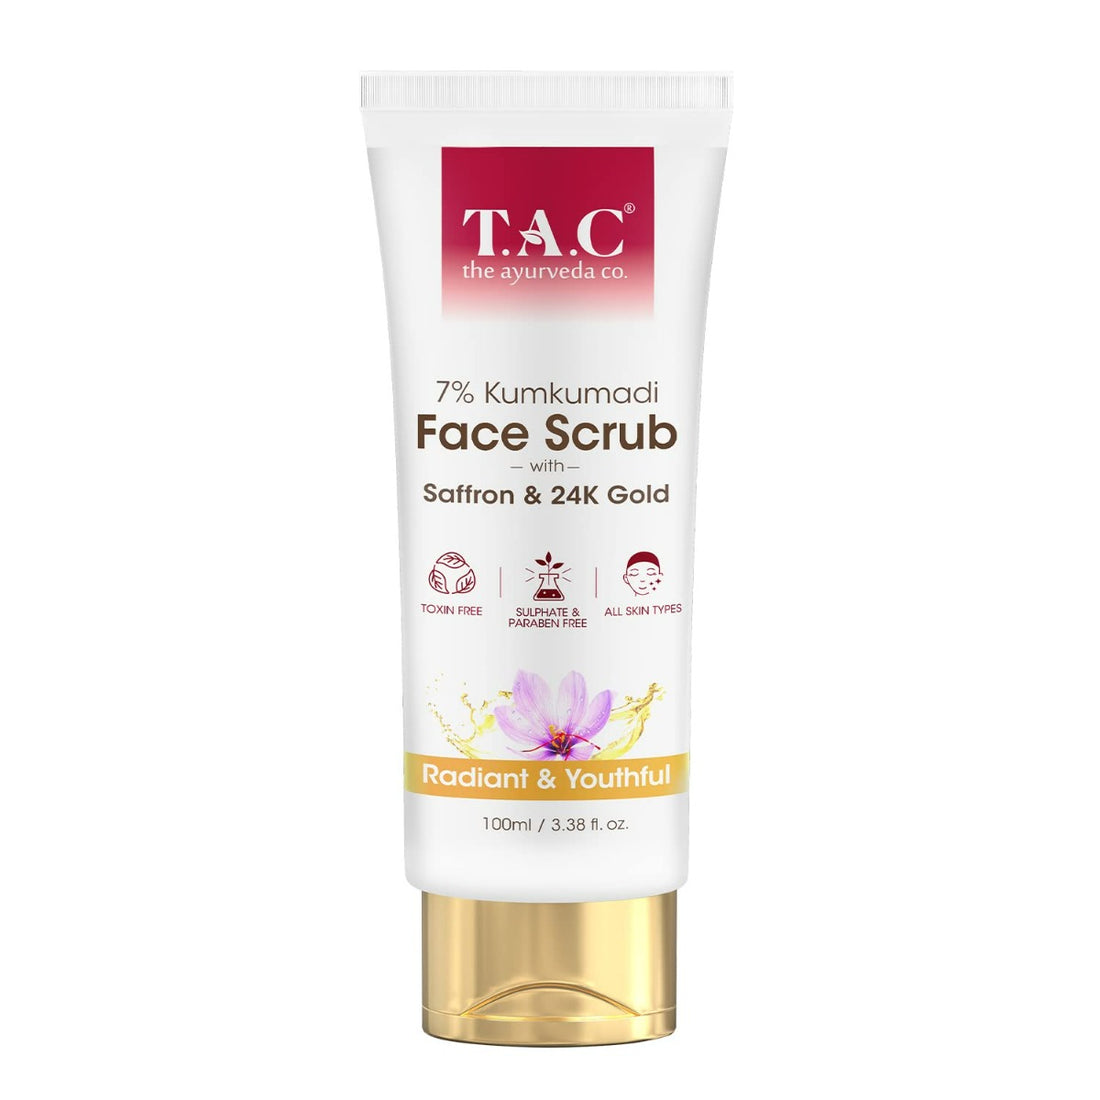 TAC - The Ayurveda Co. 7% Kumkumadi Face Scrub with 24K Gold Dust (100gm)